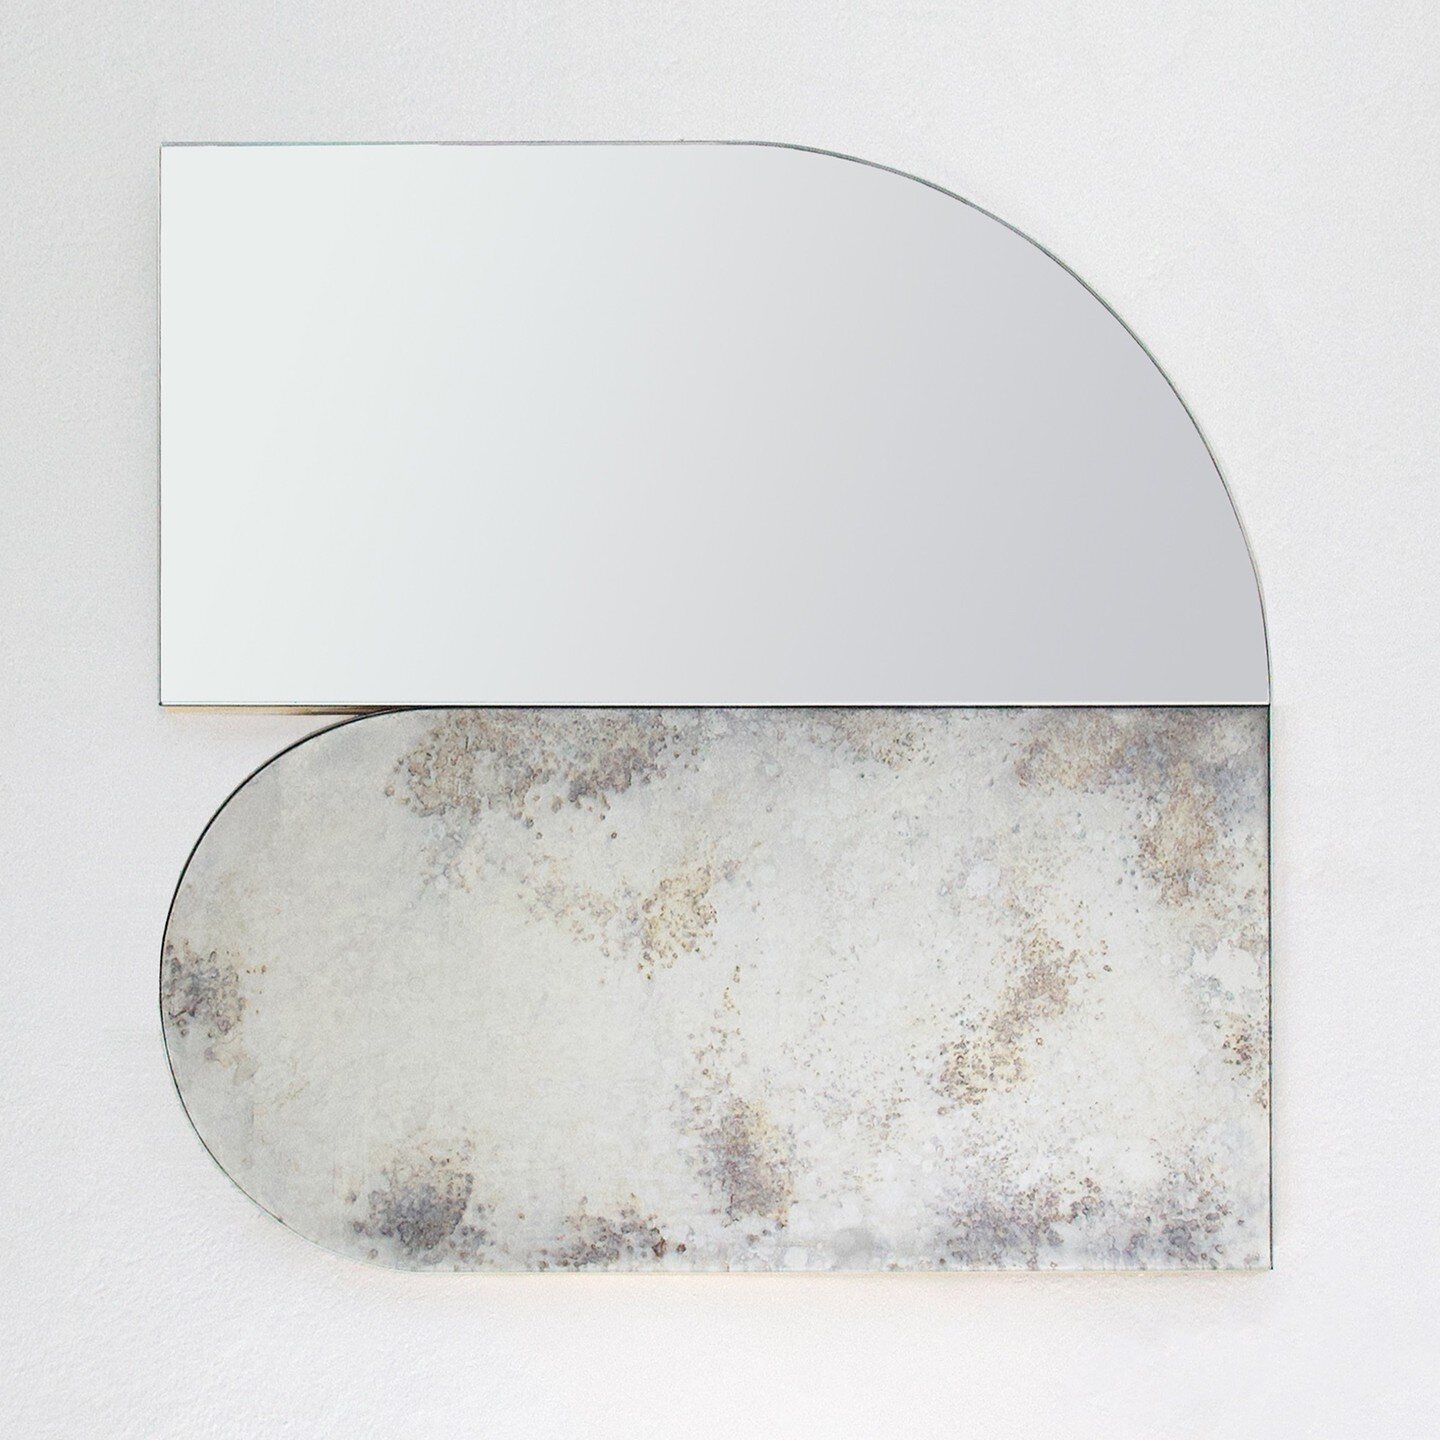 A sideways ESTHER mirror for @mediumplenty. I'm excited to see this one installed along with a custom mirror backsplash mural.⁣
⁣
⁣
⁣
⁣
⁣
#design #home #interiordesign #moderndesign #moderninterior #interiorarchitecture #interiors #decor #deco #homed